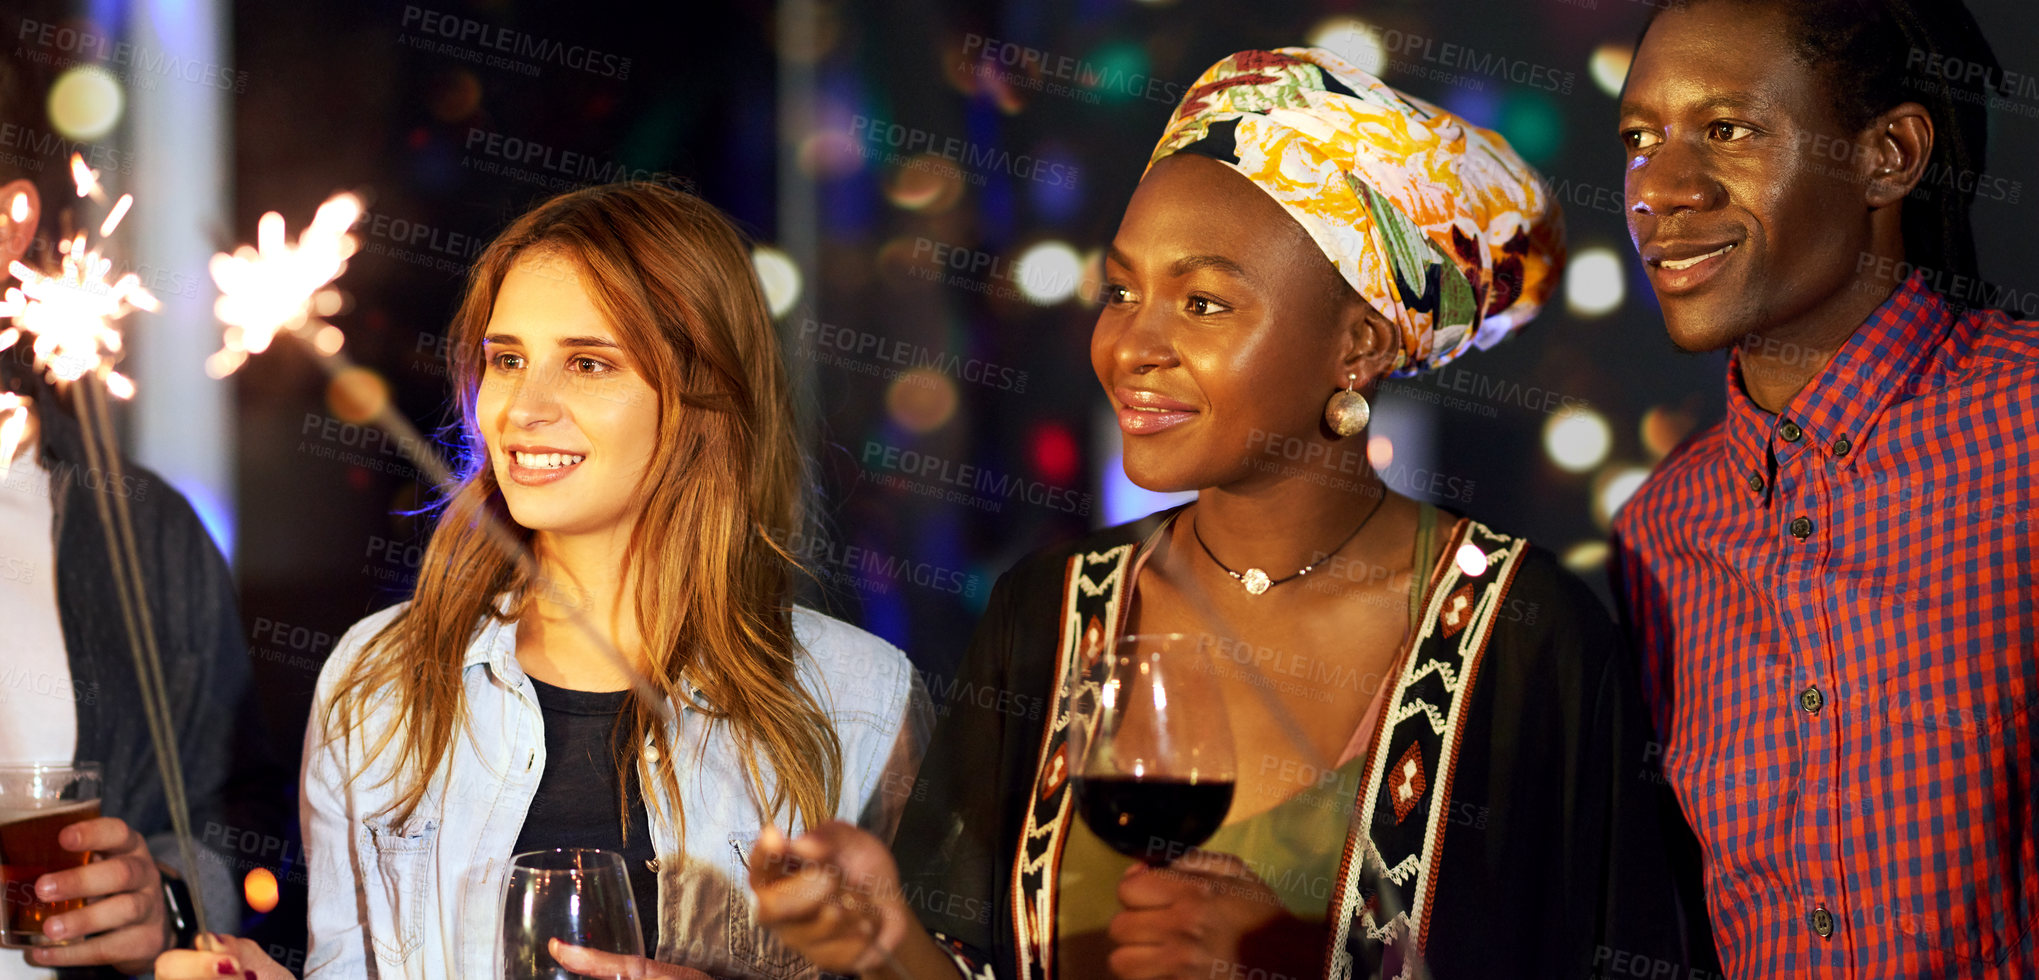 Buy stock photo Cropped shot of a group of friends having fun at a nightclub